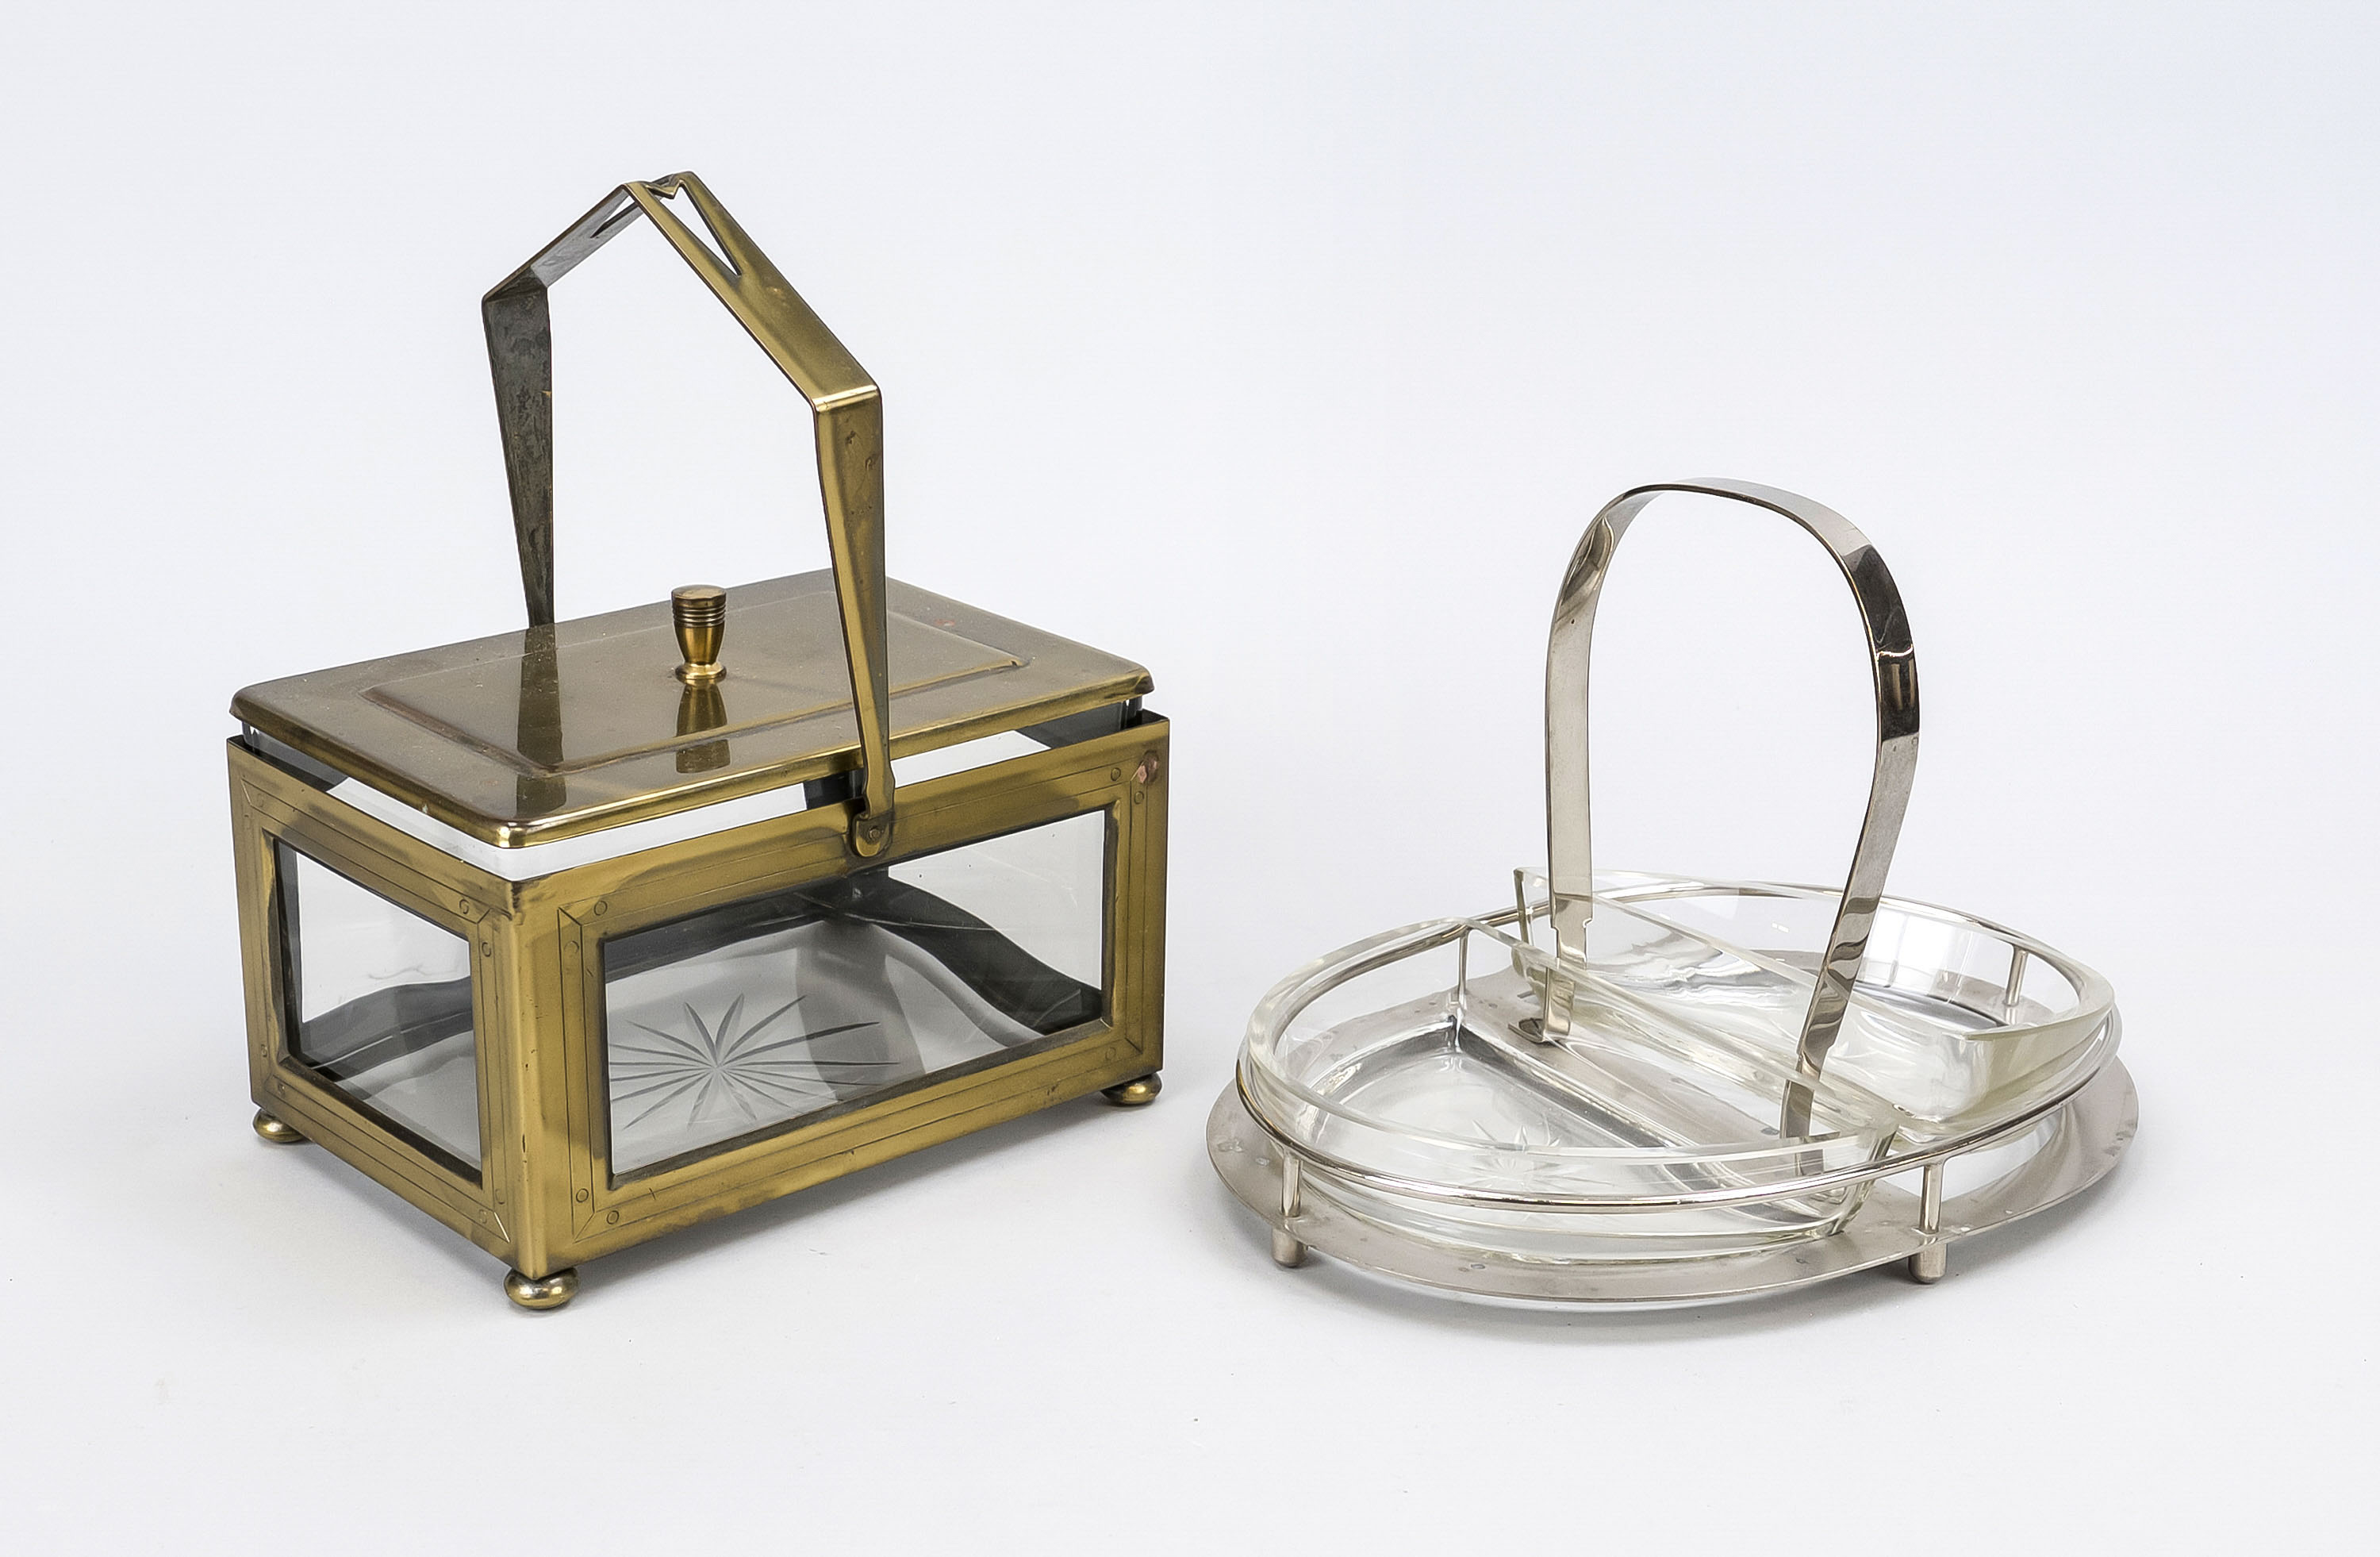 Confectionery bowl and handle box, c. 1930, chrome-plated brass bowl, two star-cut glass inserts,